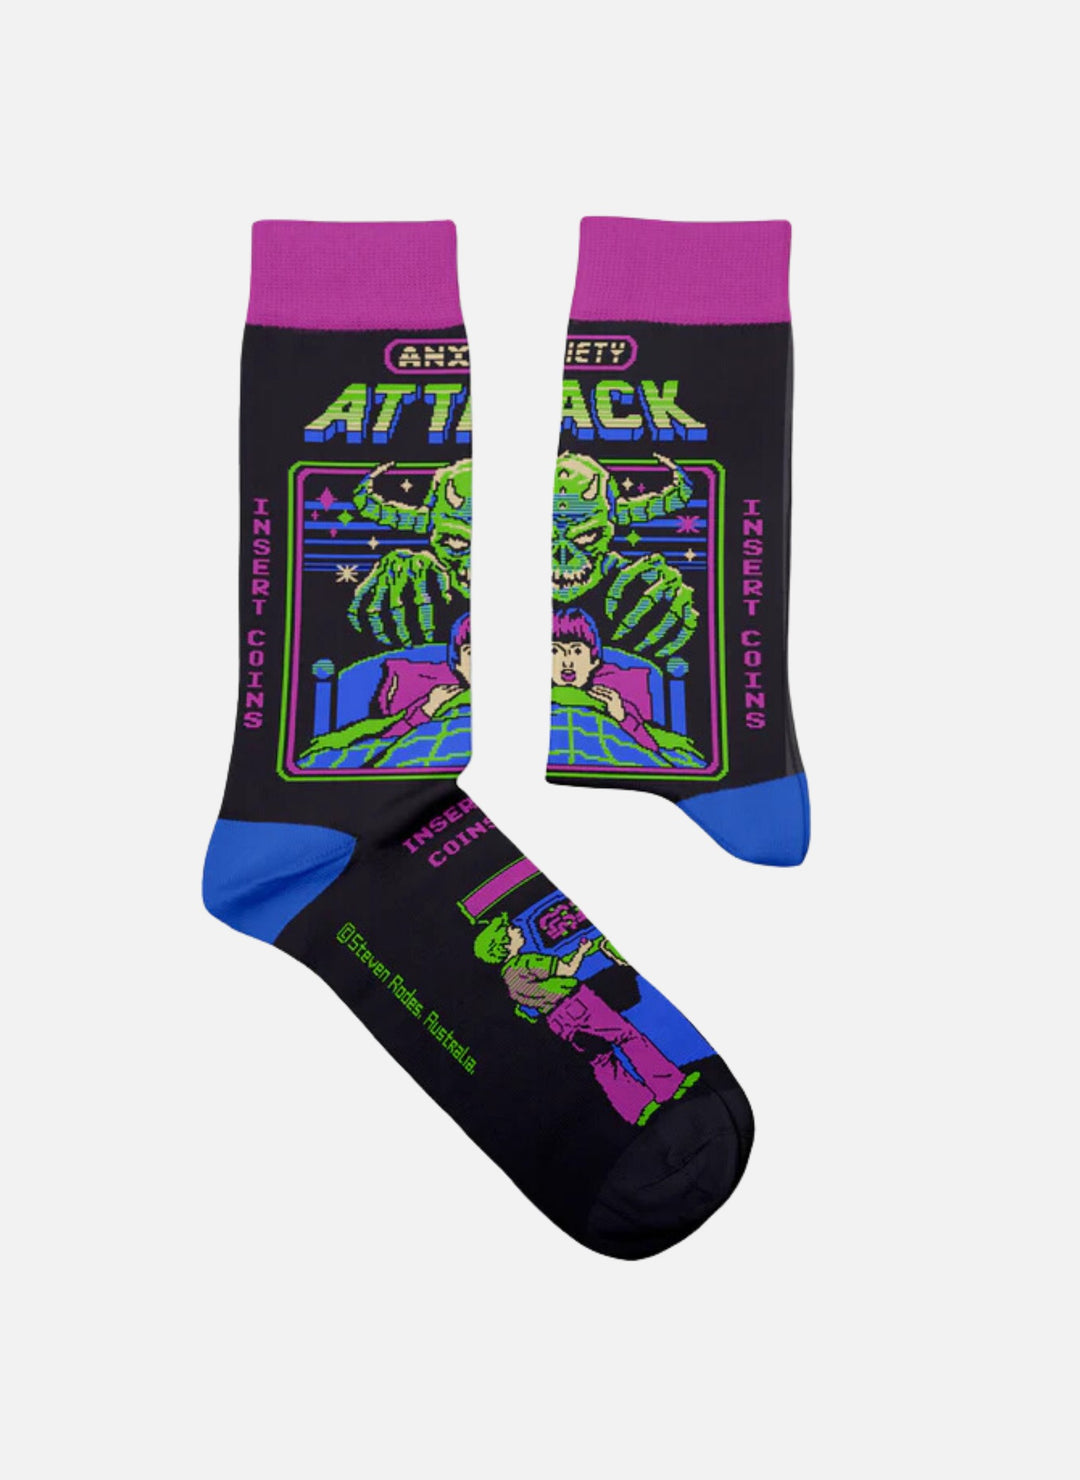 Chaussettes Anxiety Attack, Steven Rhodes